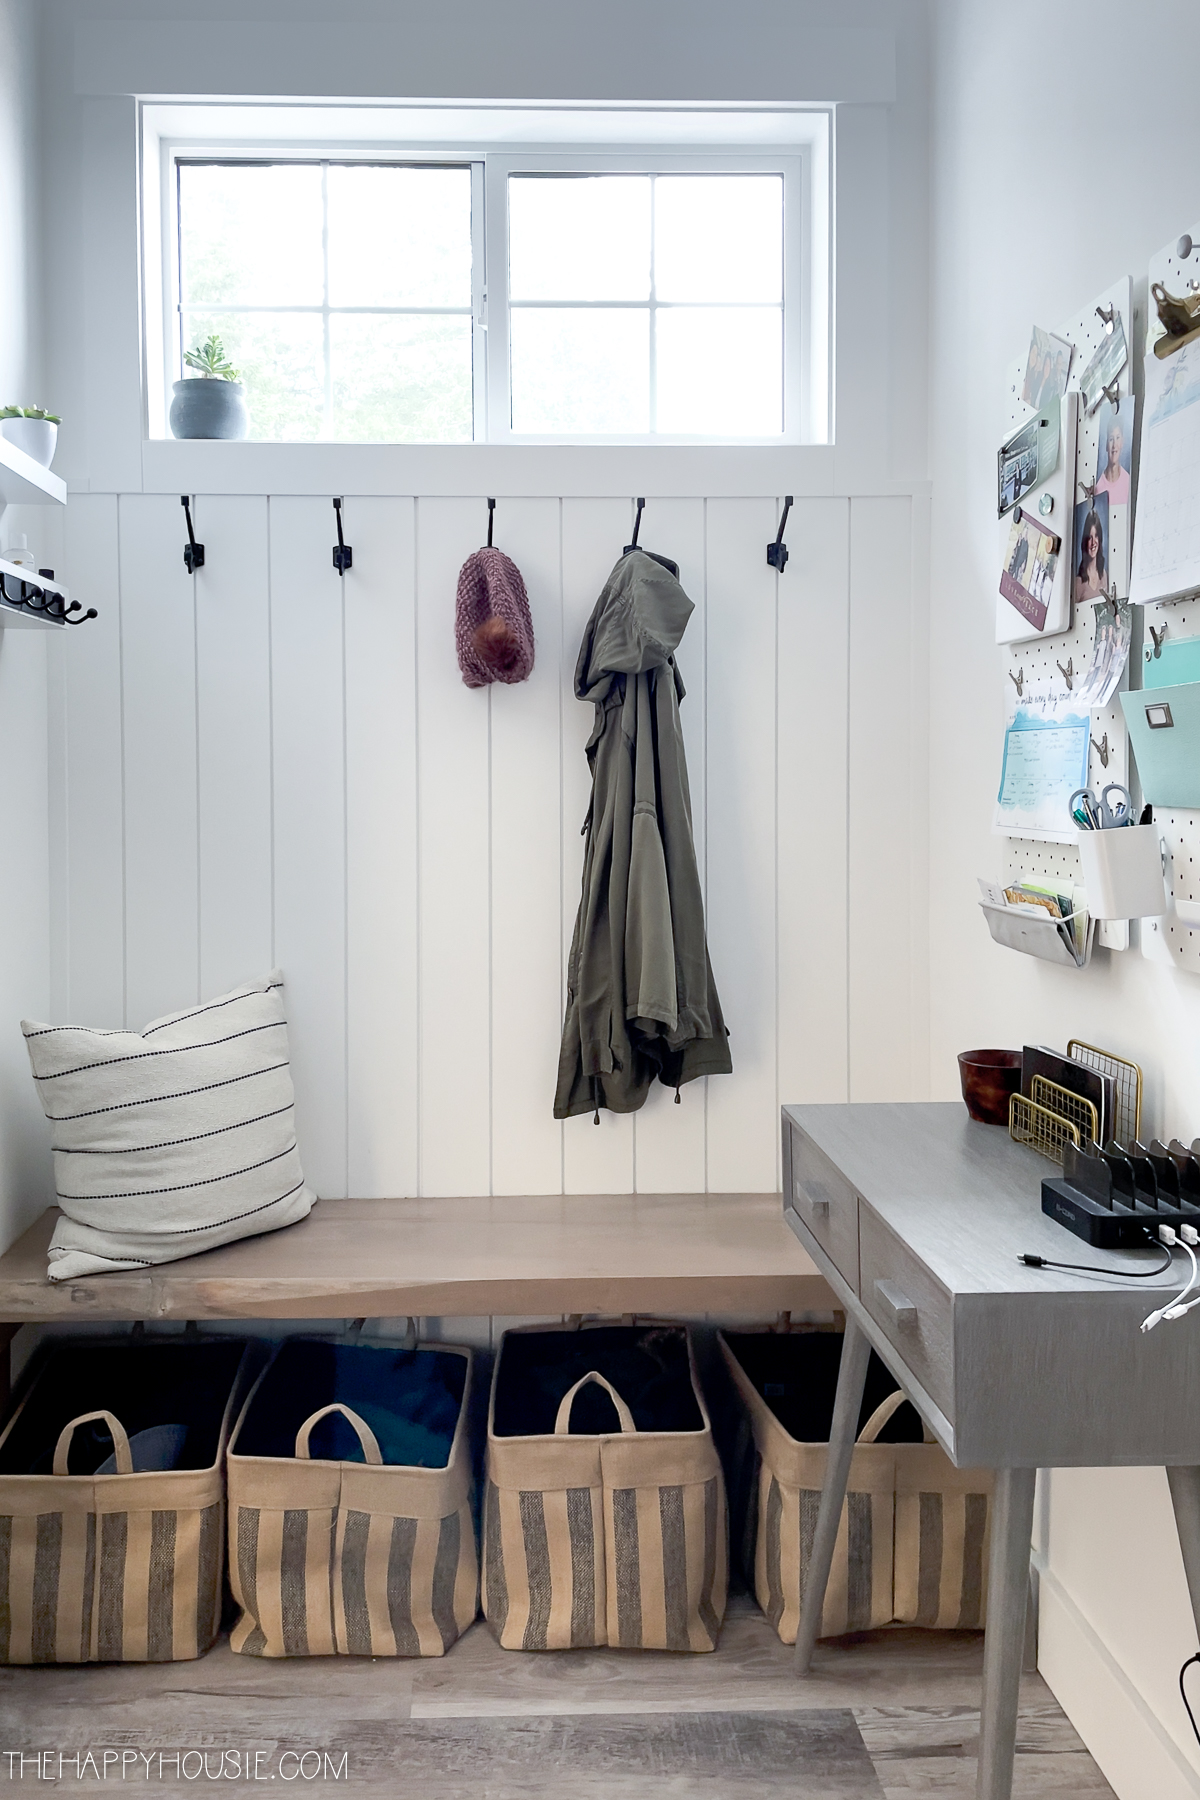 https://www.thehappyhousie.com/wp-content/uploads/2022/01/how-to-organize-your-laundry-room-and-mudroom-17.jpg